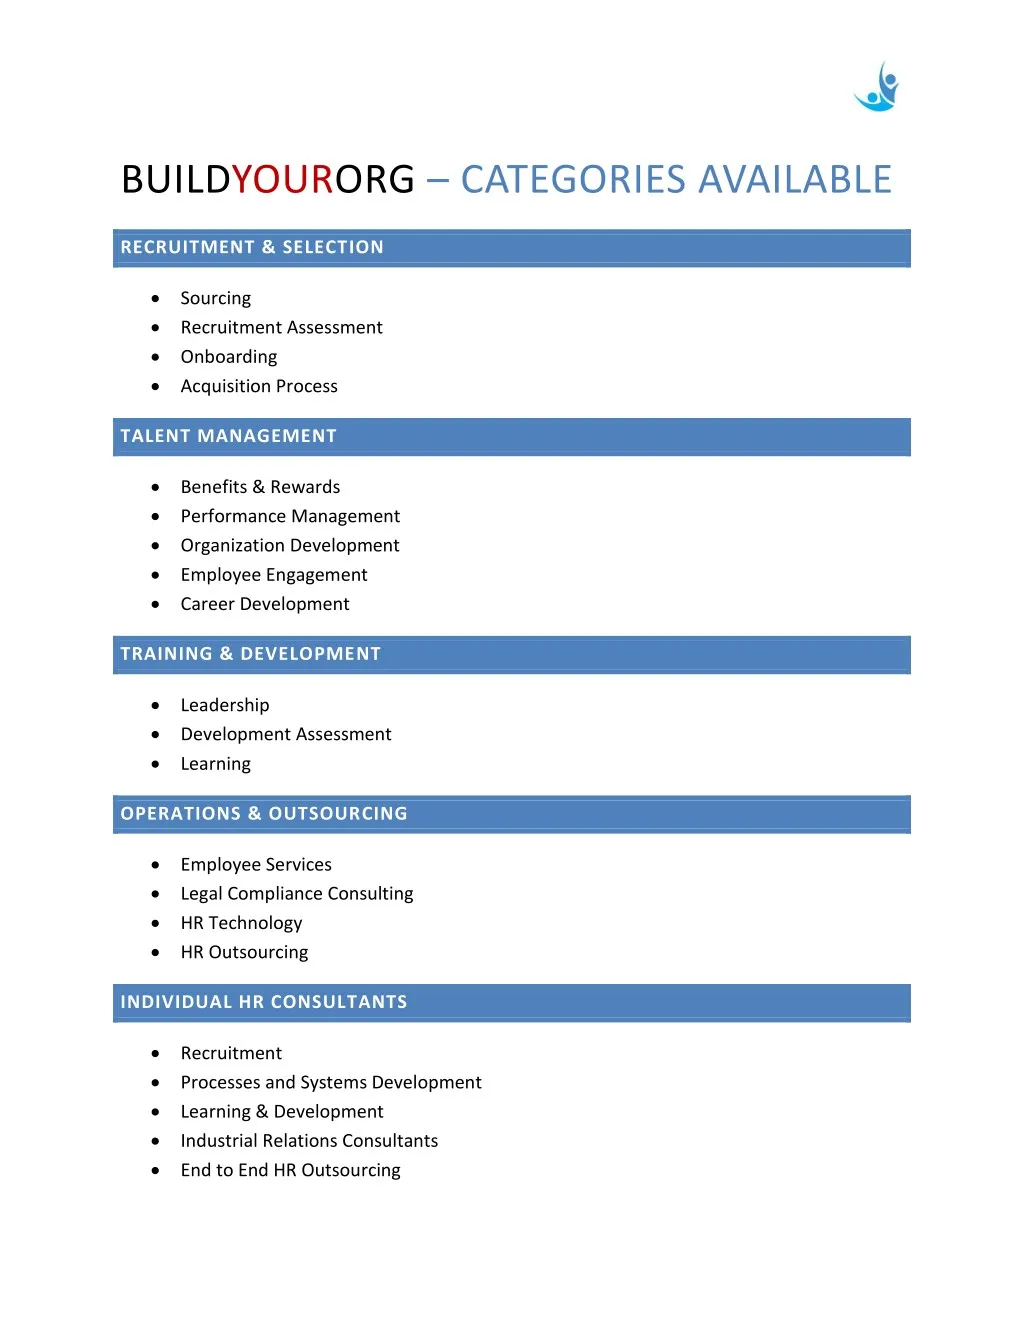 buildyourorg categories available